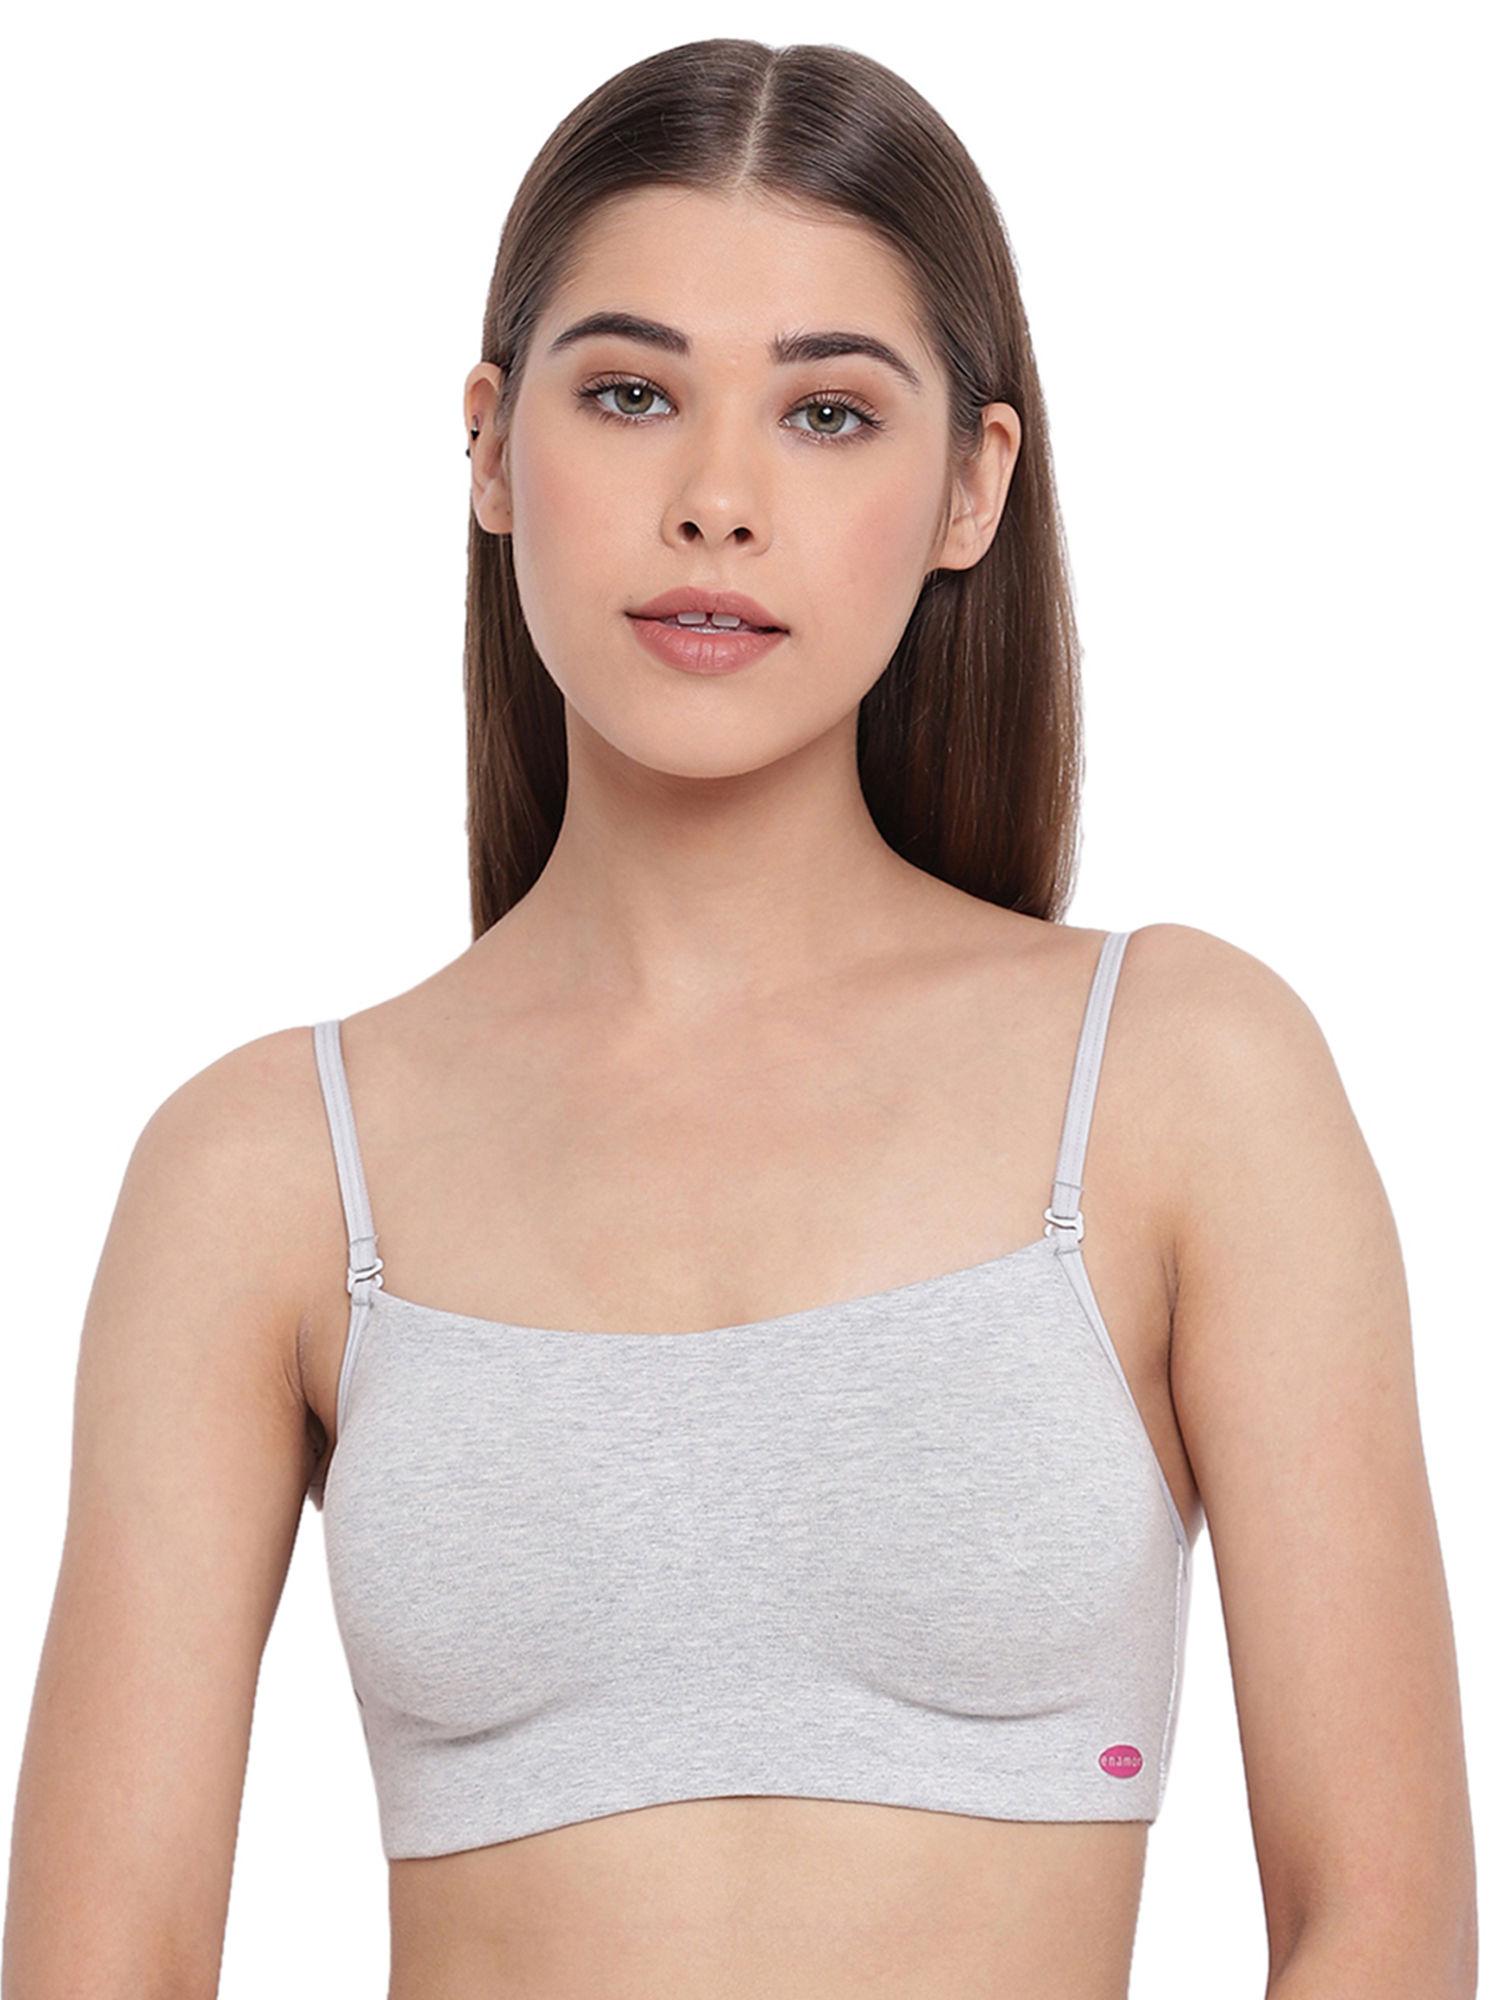 a022 cotton cami with detachable straps bra- non-padded,wirefree, high coverage - grey